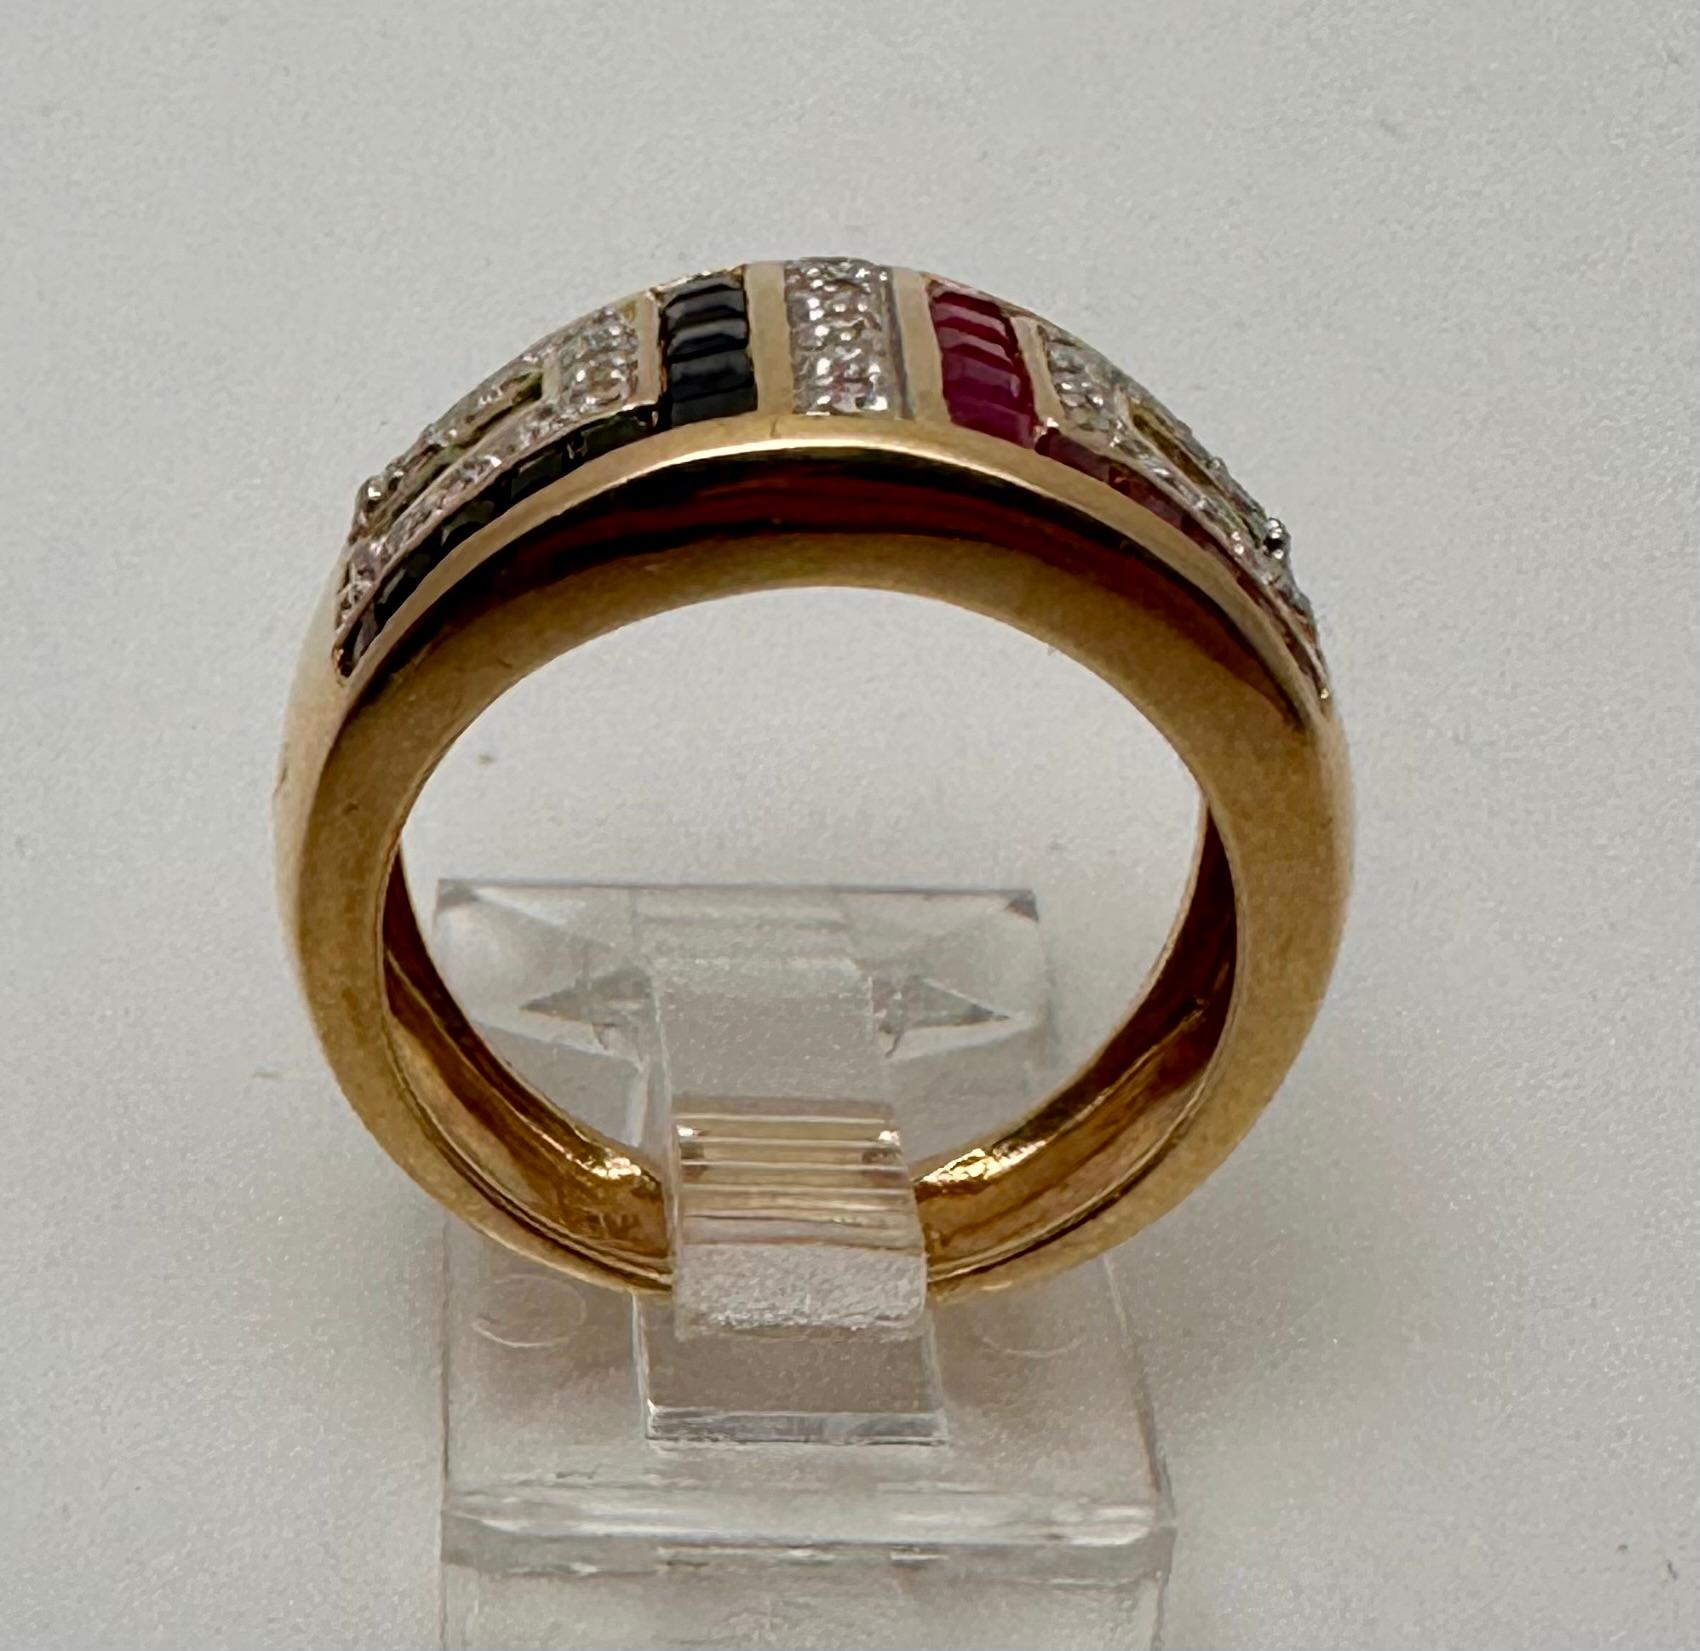 Emerald Cut 14k Yellow Gold 10.5 mm Wide Ruby Sapphire Diamond Emerald Ring Size 10 For Sale